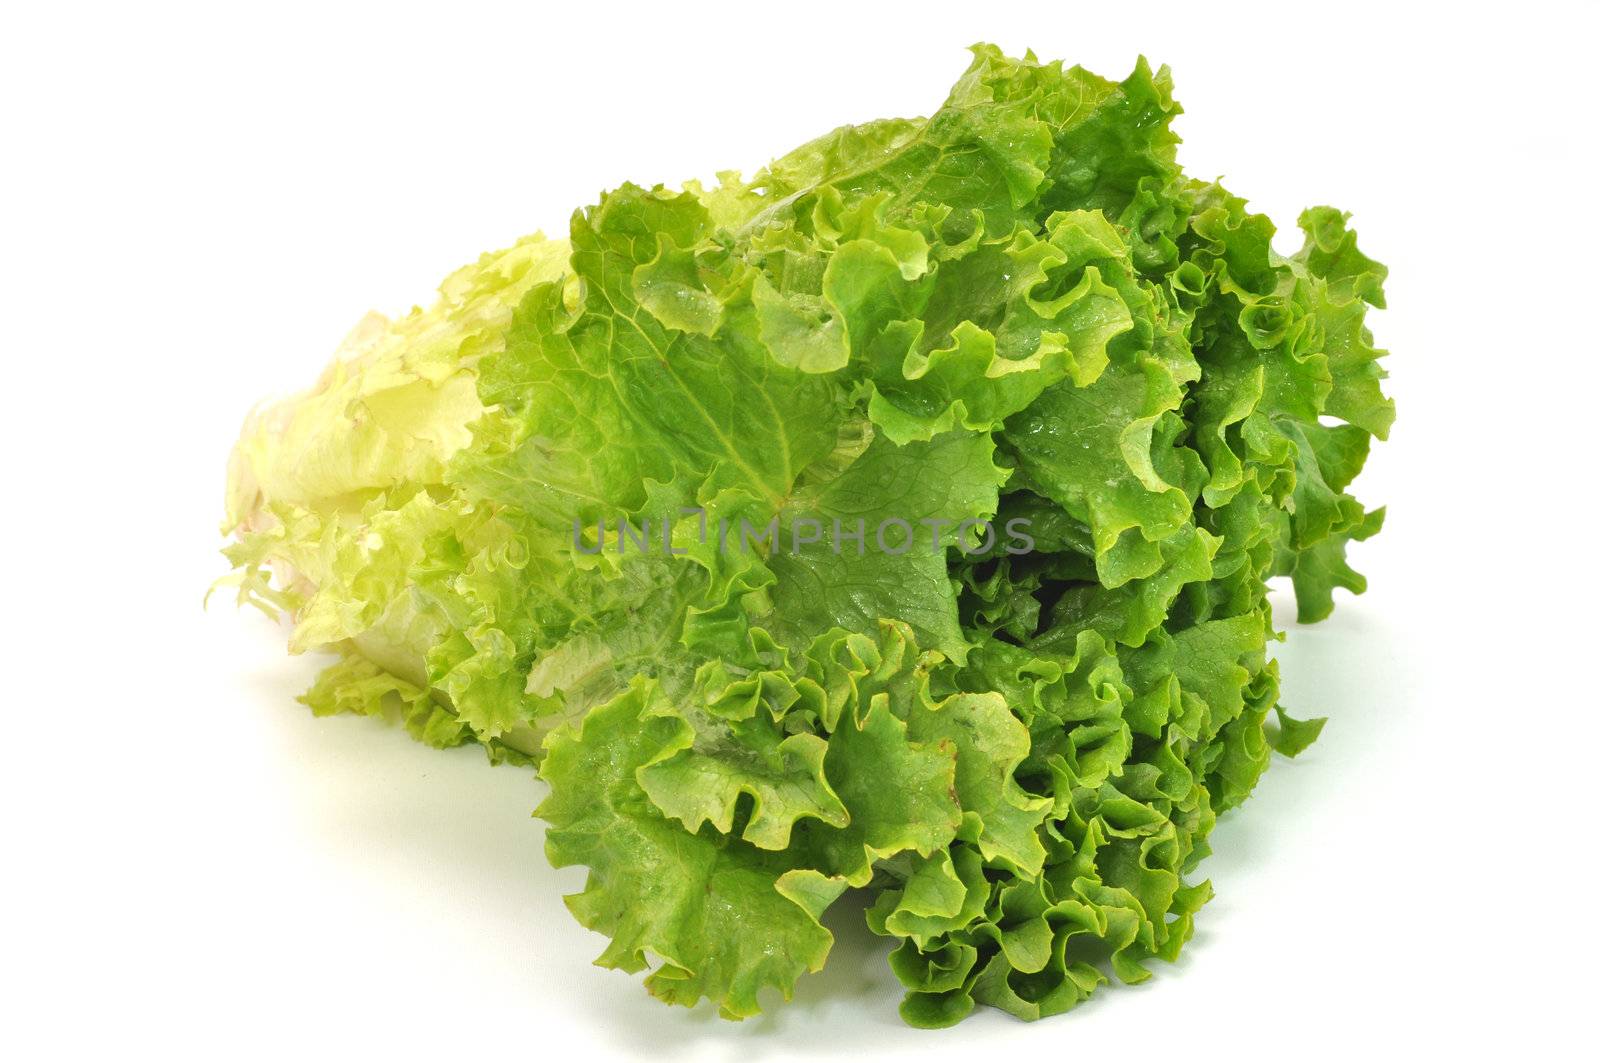 Green leafy lettuce isolated on white background.